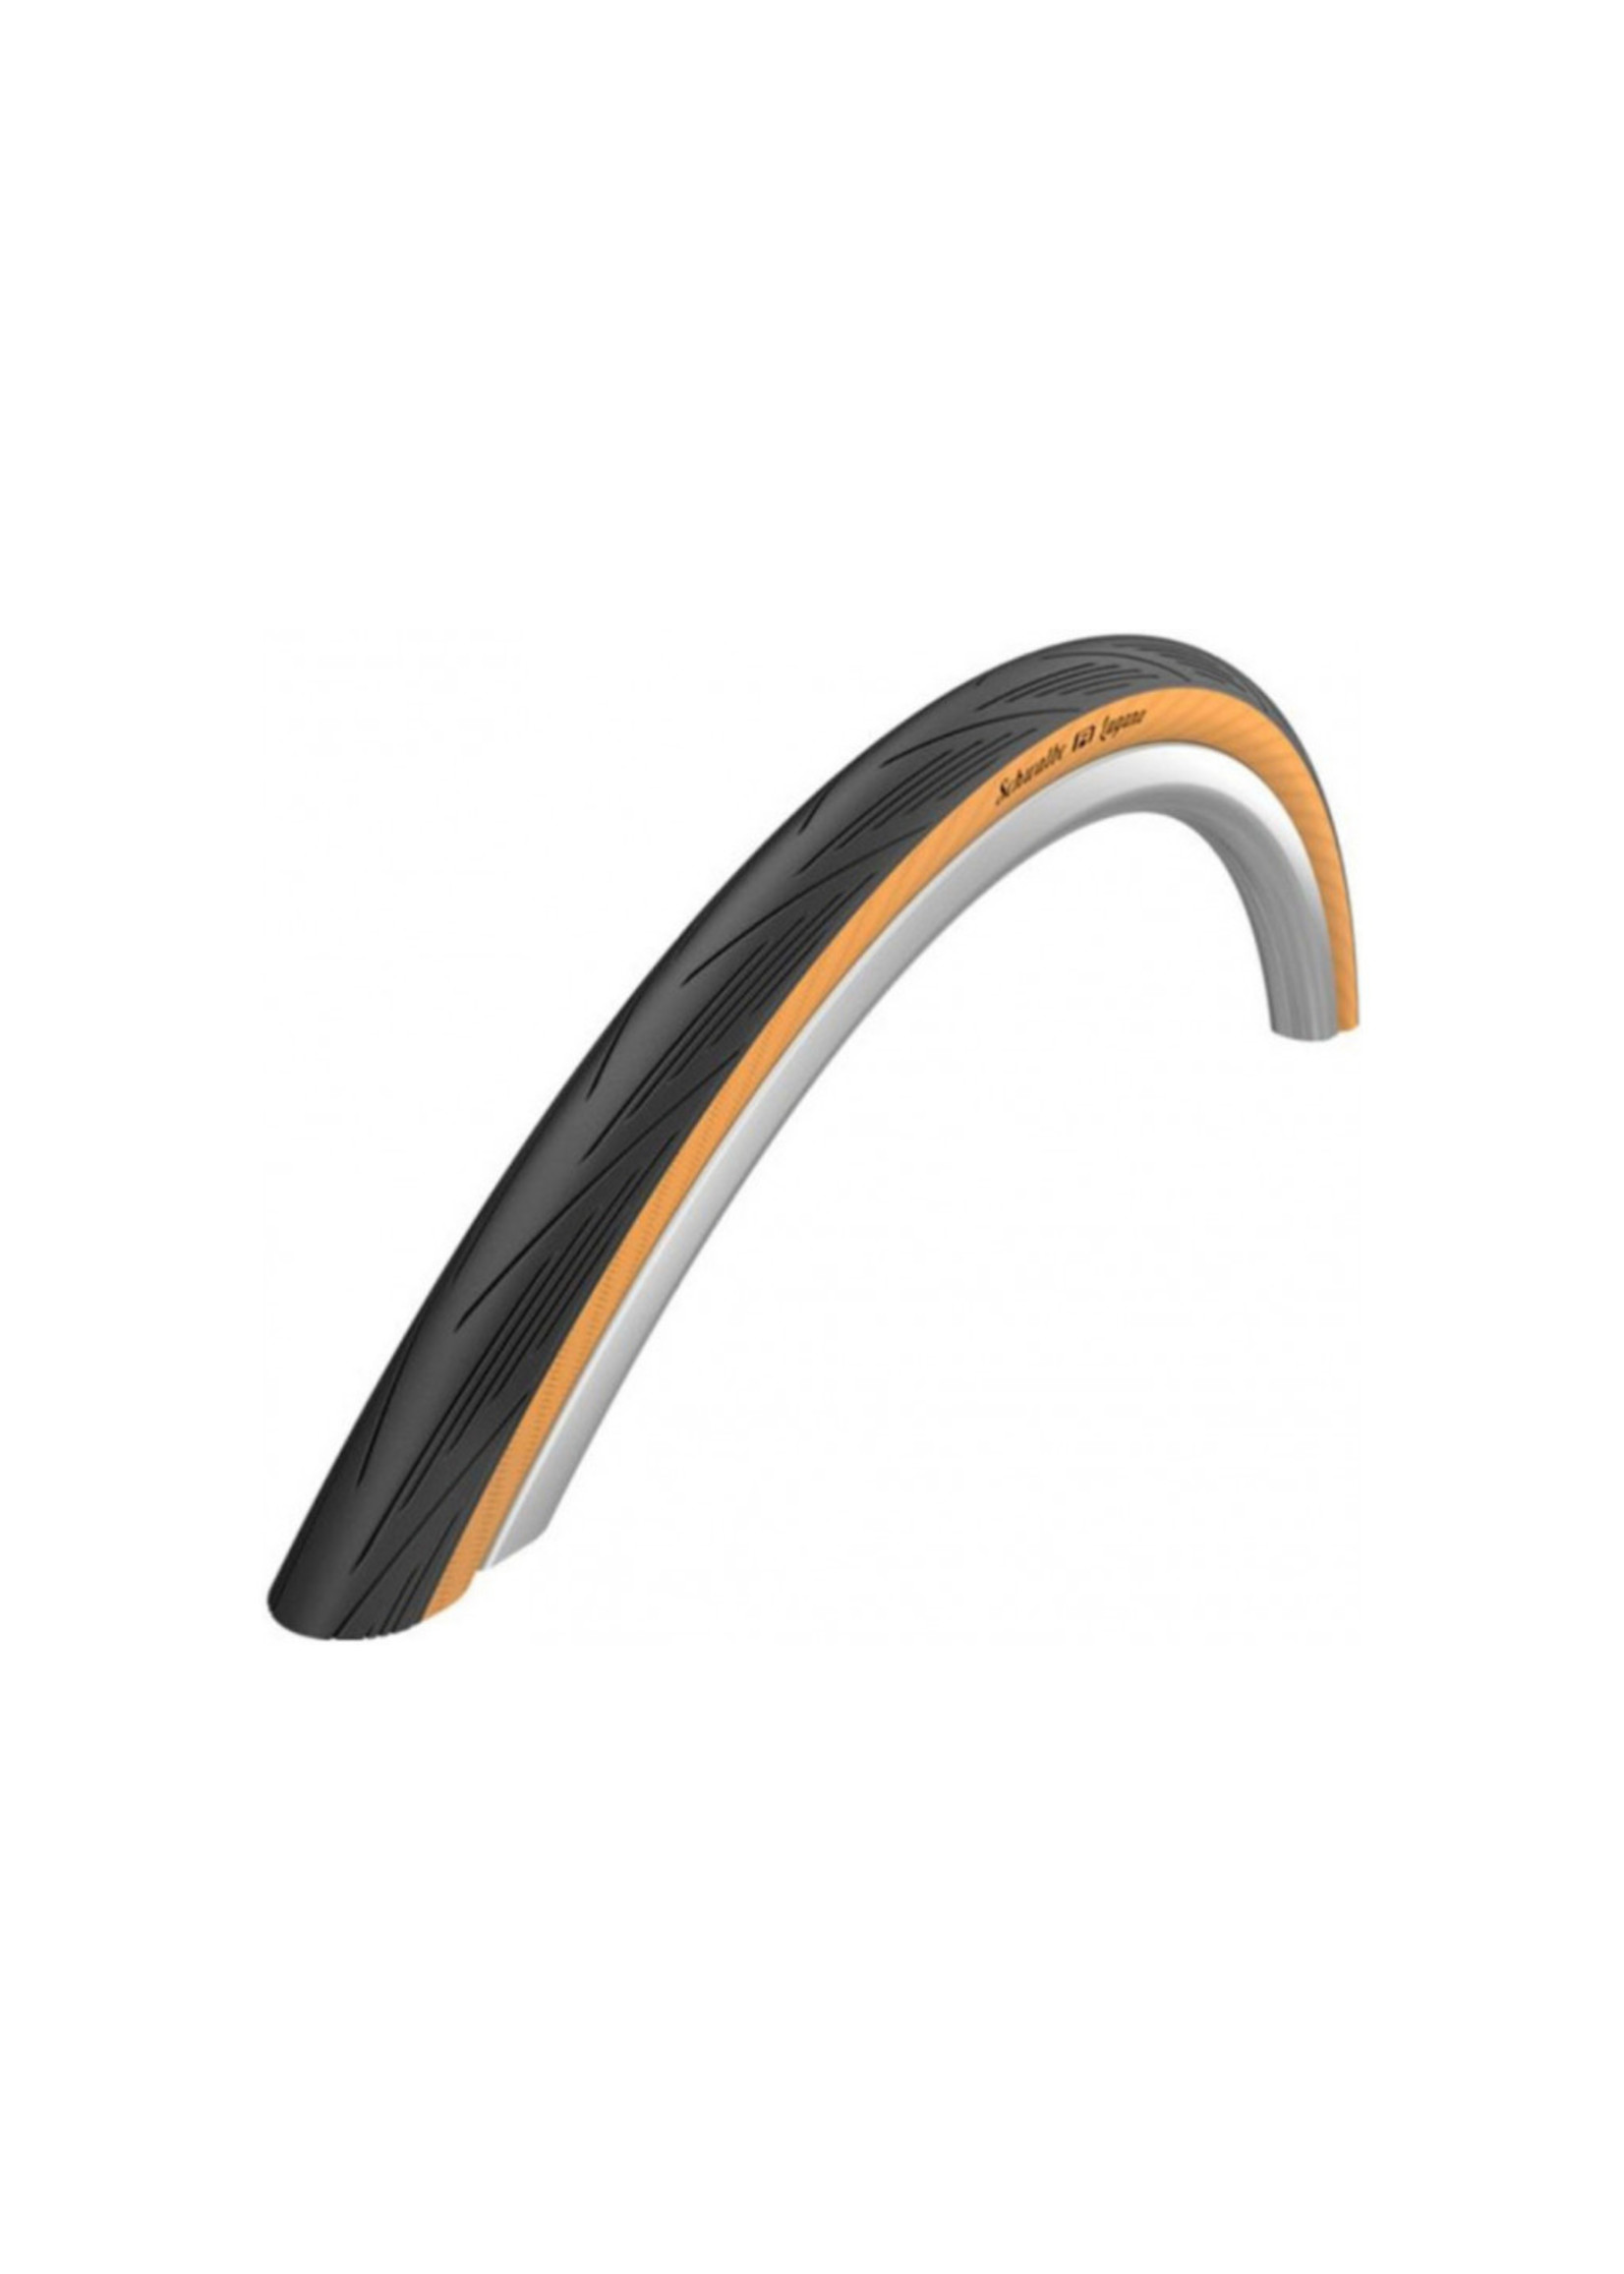 Schwalbe Lugano cream / black (ONLY 1 AVAILABLE!)